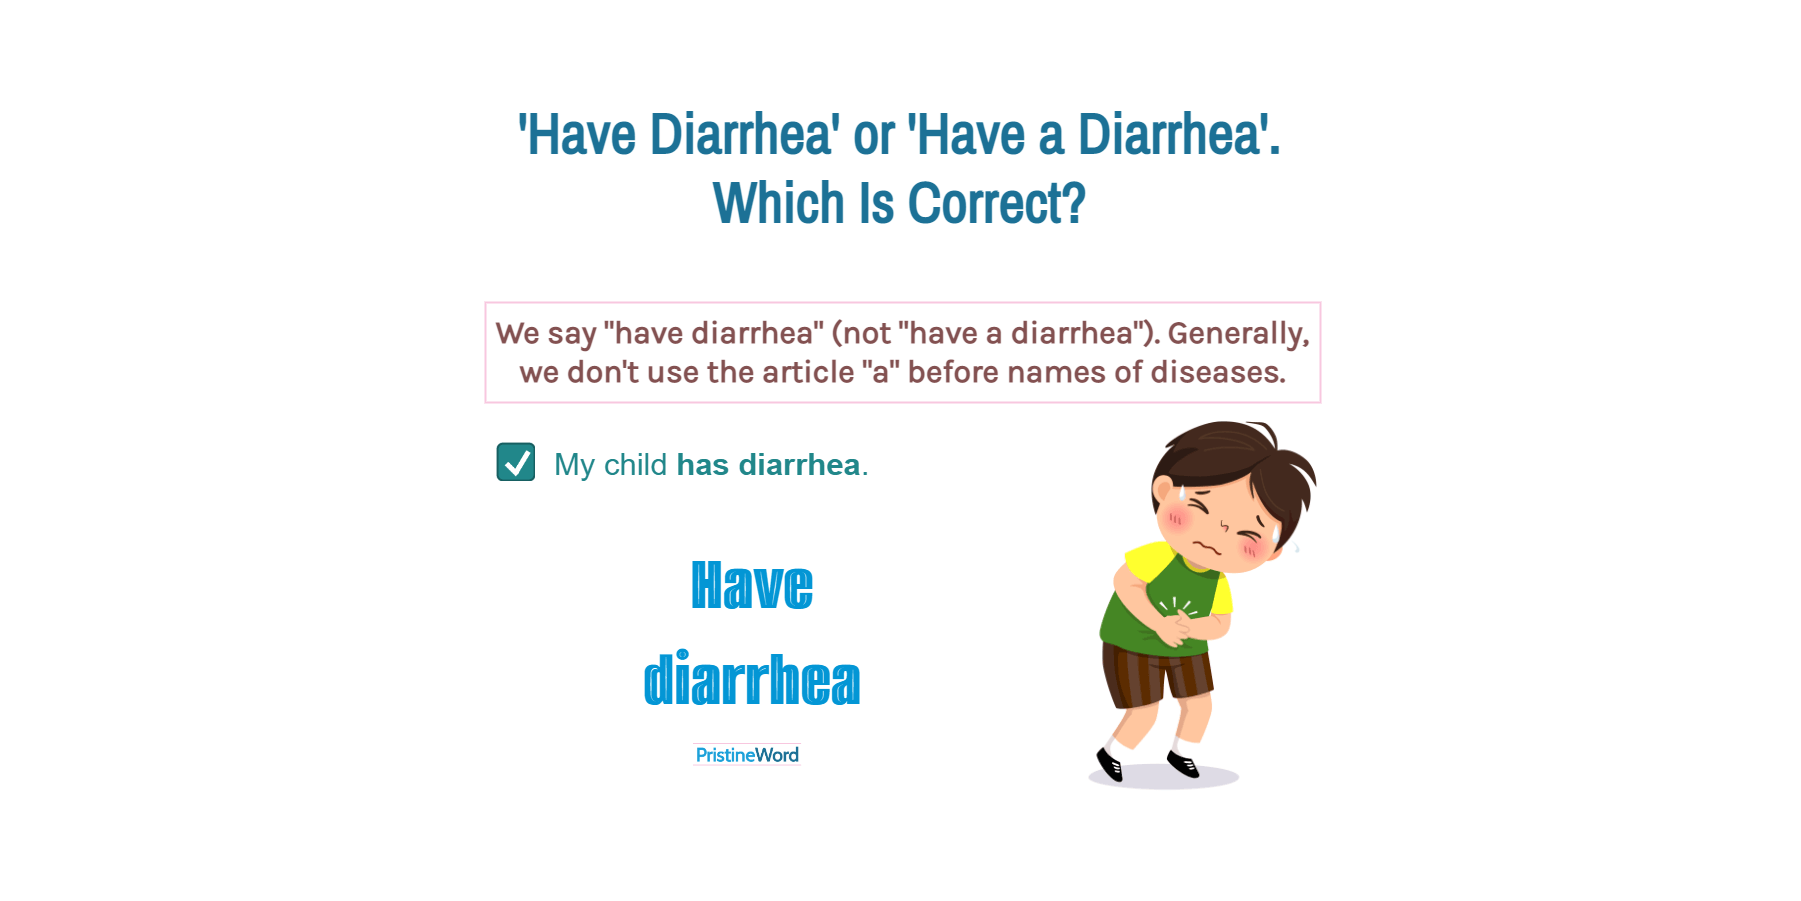 Have Diarrhea or Have a Diarrhea. Which Is Correct?